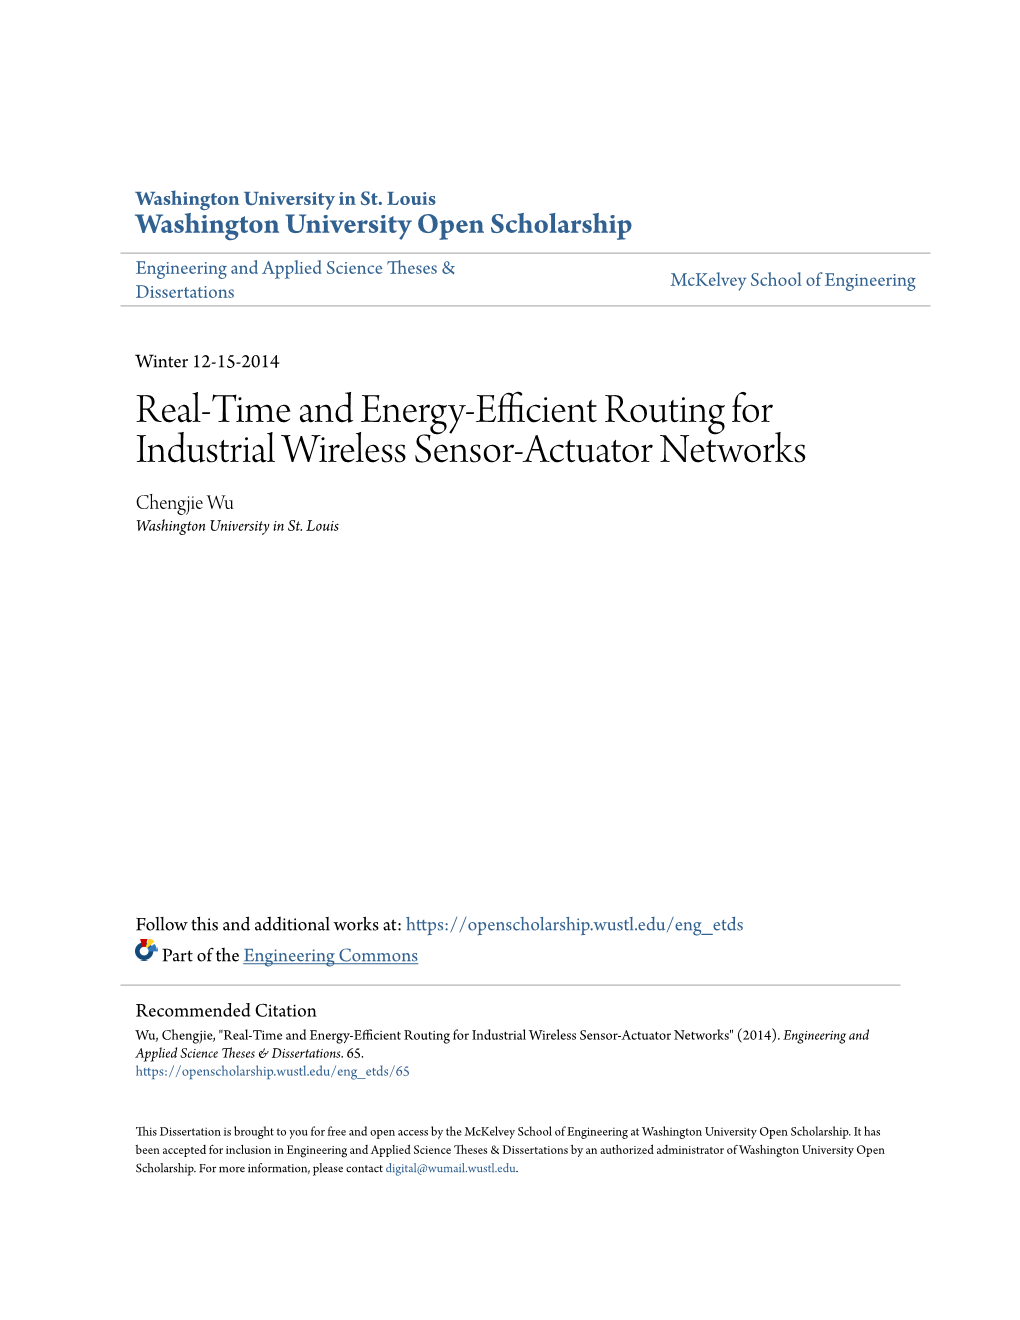 Real-Time and Energy-Efficient Routing for Industrial Wireless Sensor-Actuator Networks Chengjie Wu Washington University in St